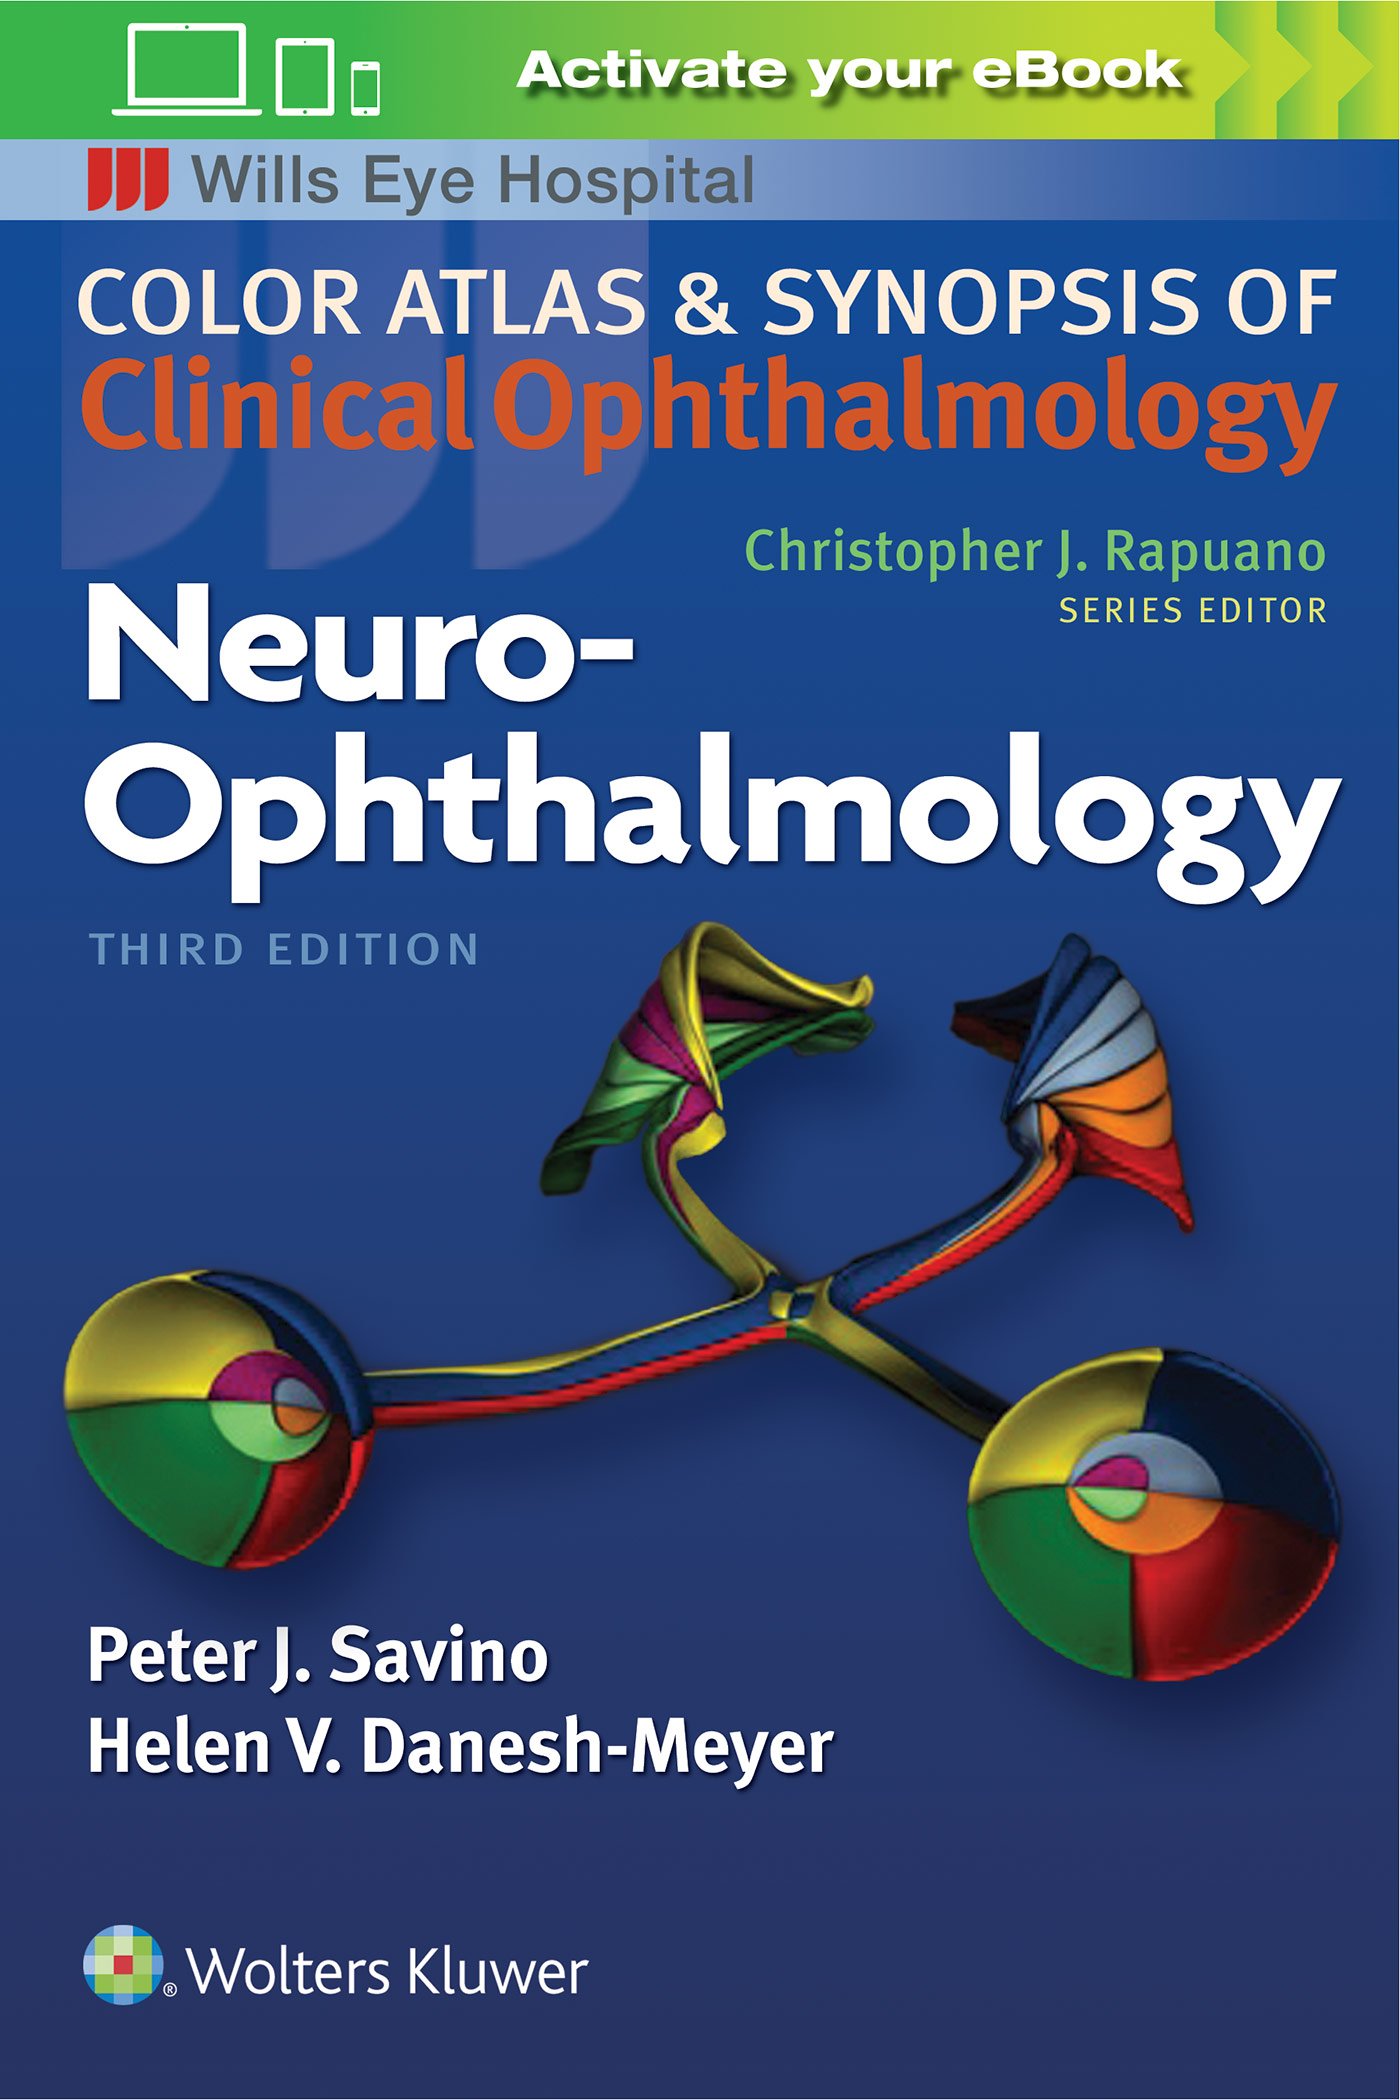 Neuro-Ophthalmology (Color Atlas & Synopsis Of Clinical Ophthalmology)